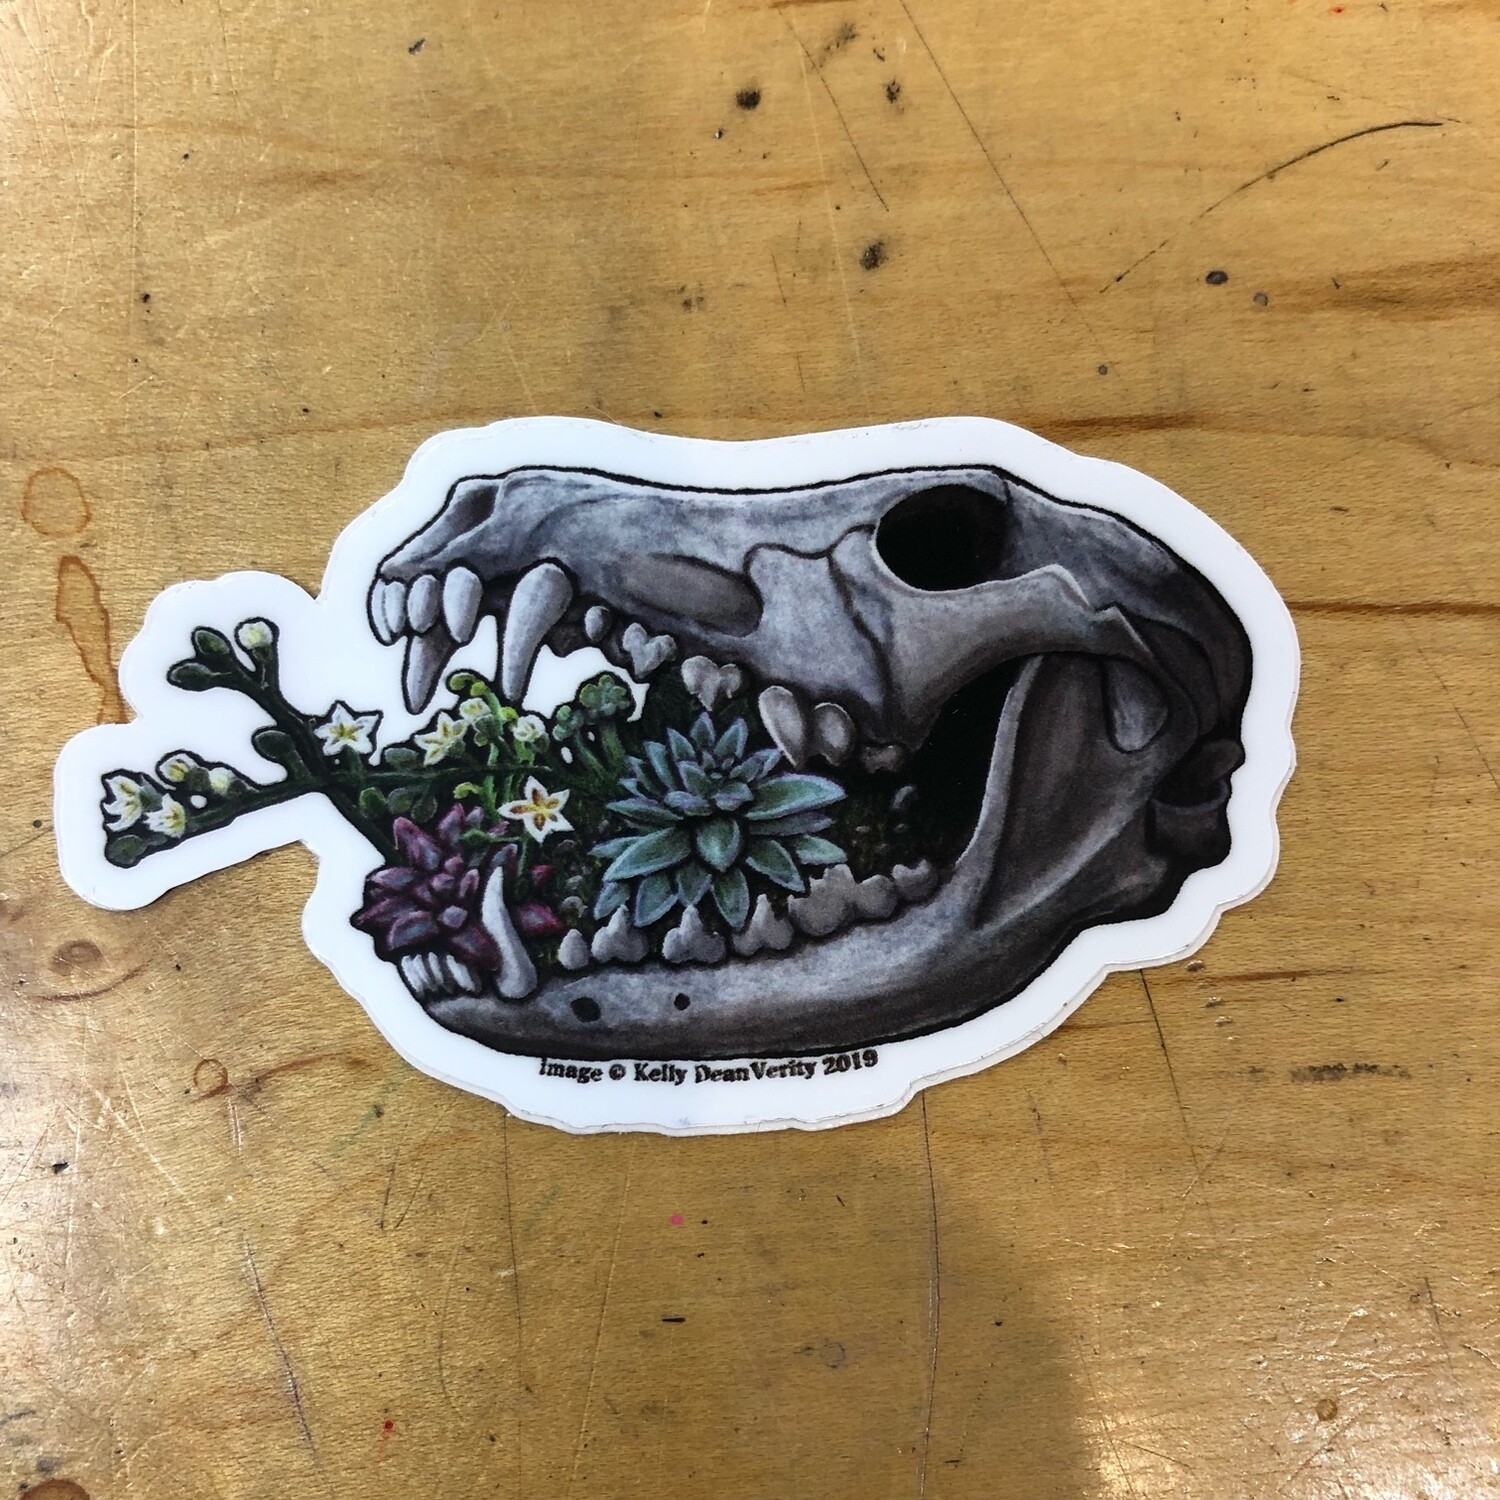 Coyote Skull with Succulents - Sticker by Kelly Dean Verity